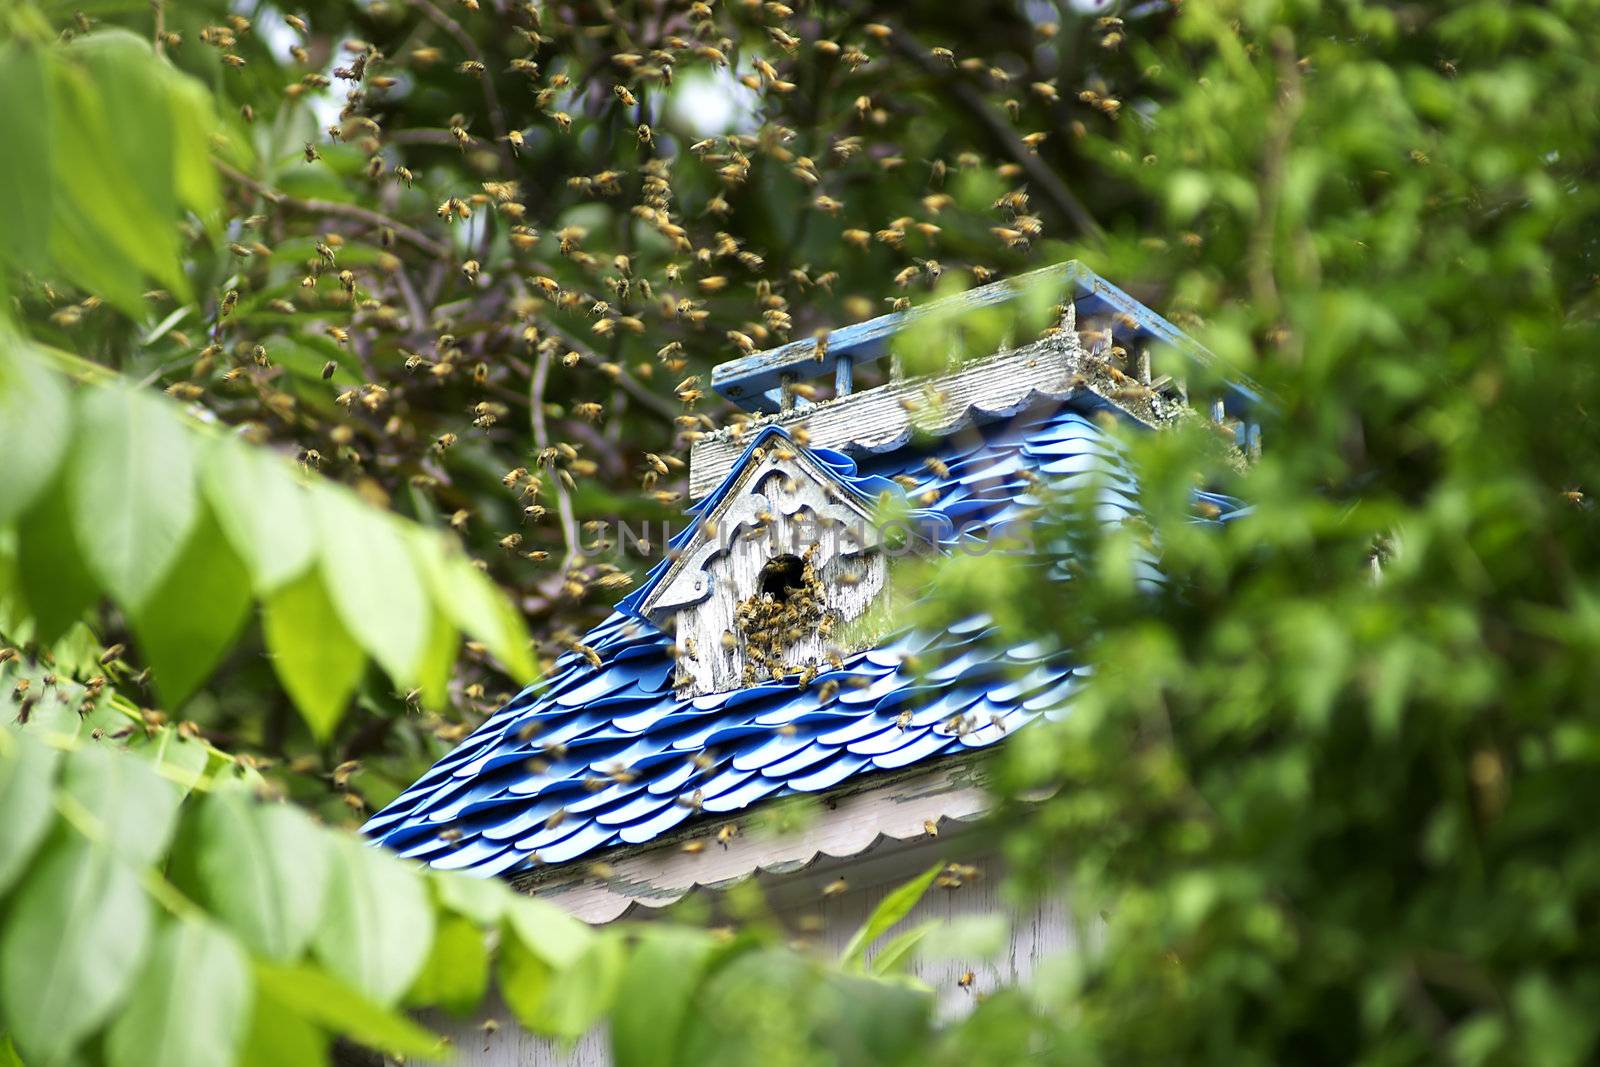 Huge swarming of bees as they are checking out this old abandoned bird nest box as a possible new home up in the trees.